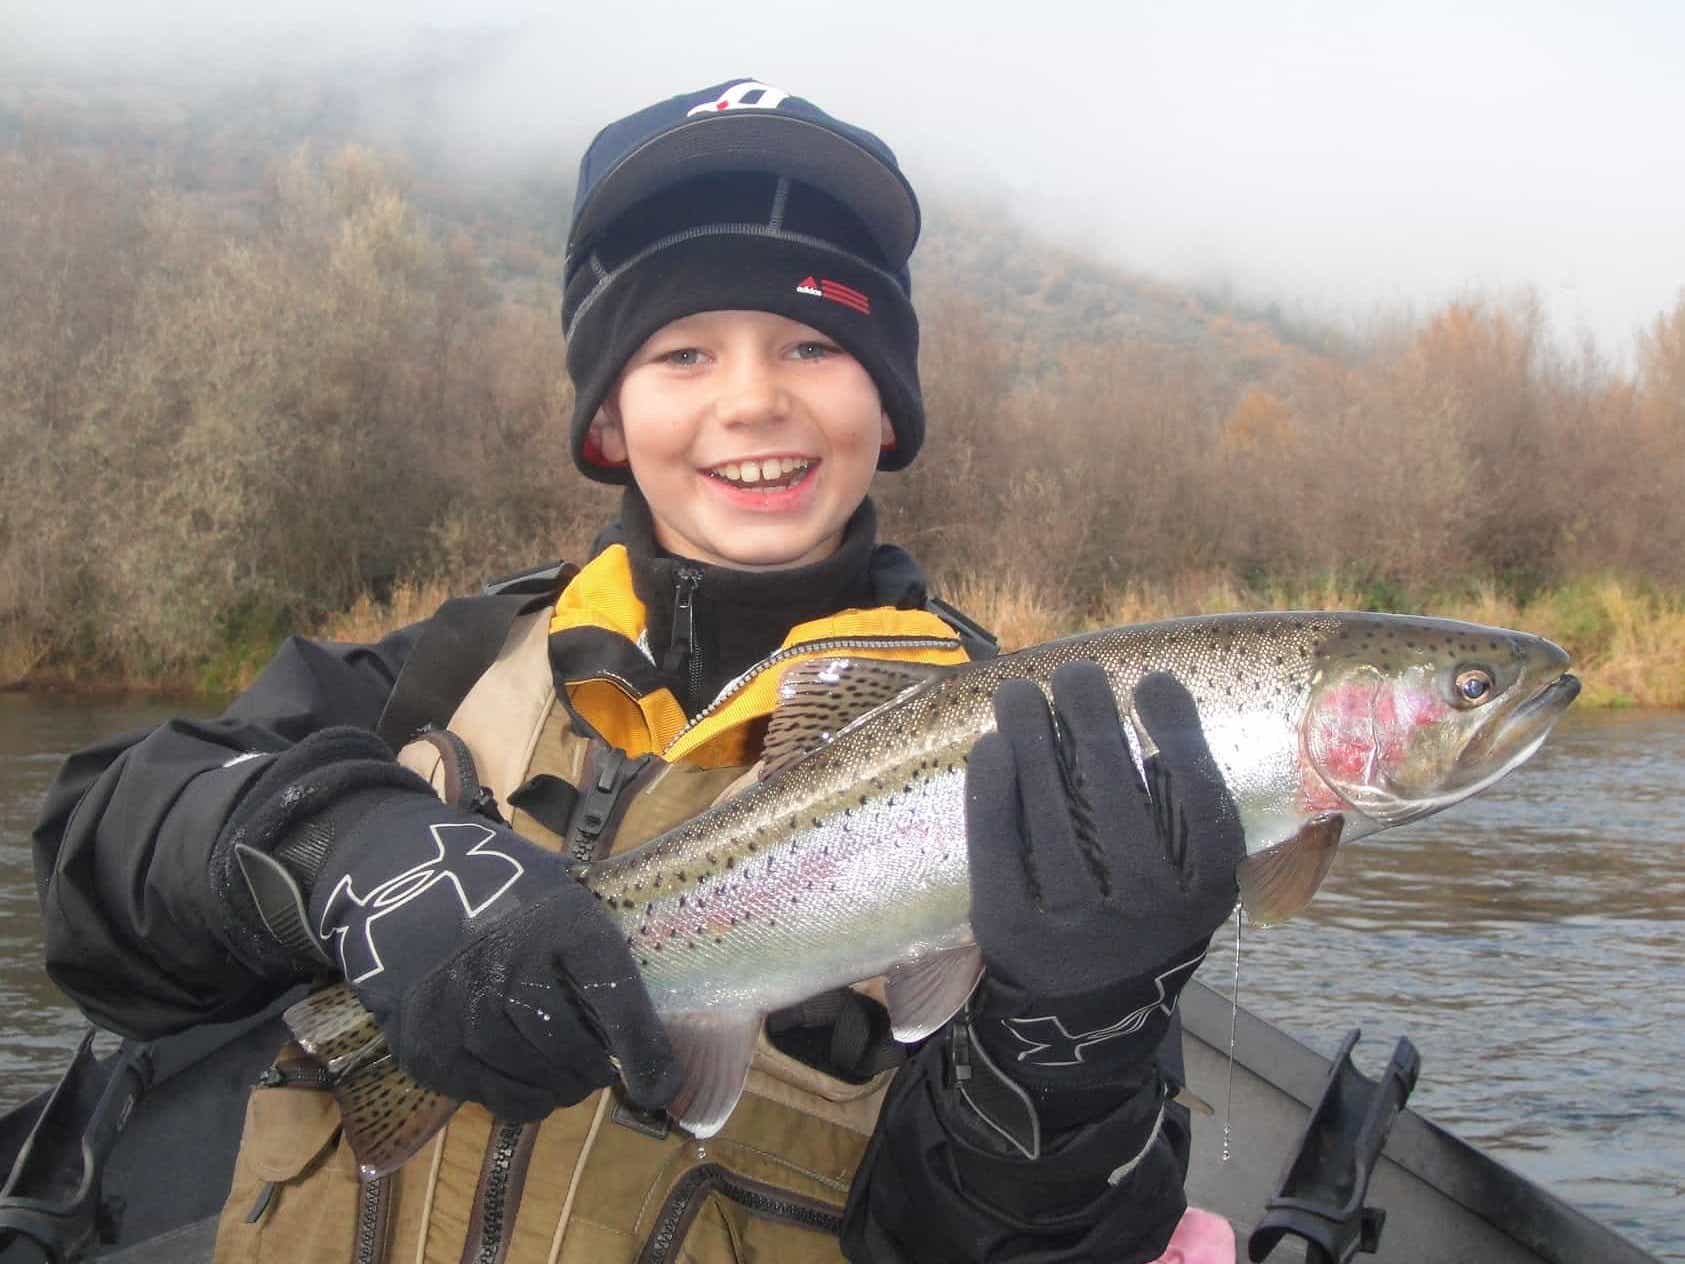 Rogue river steelhead caught fishing the upper Rogue in fall.